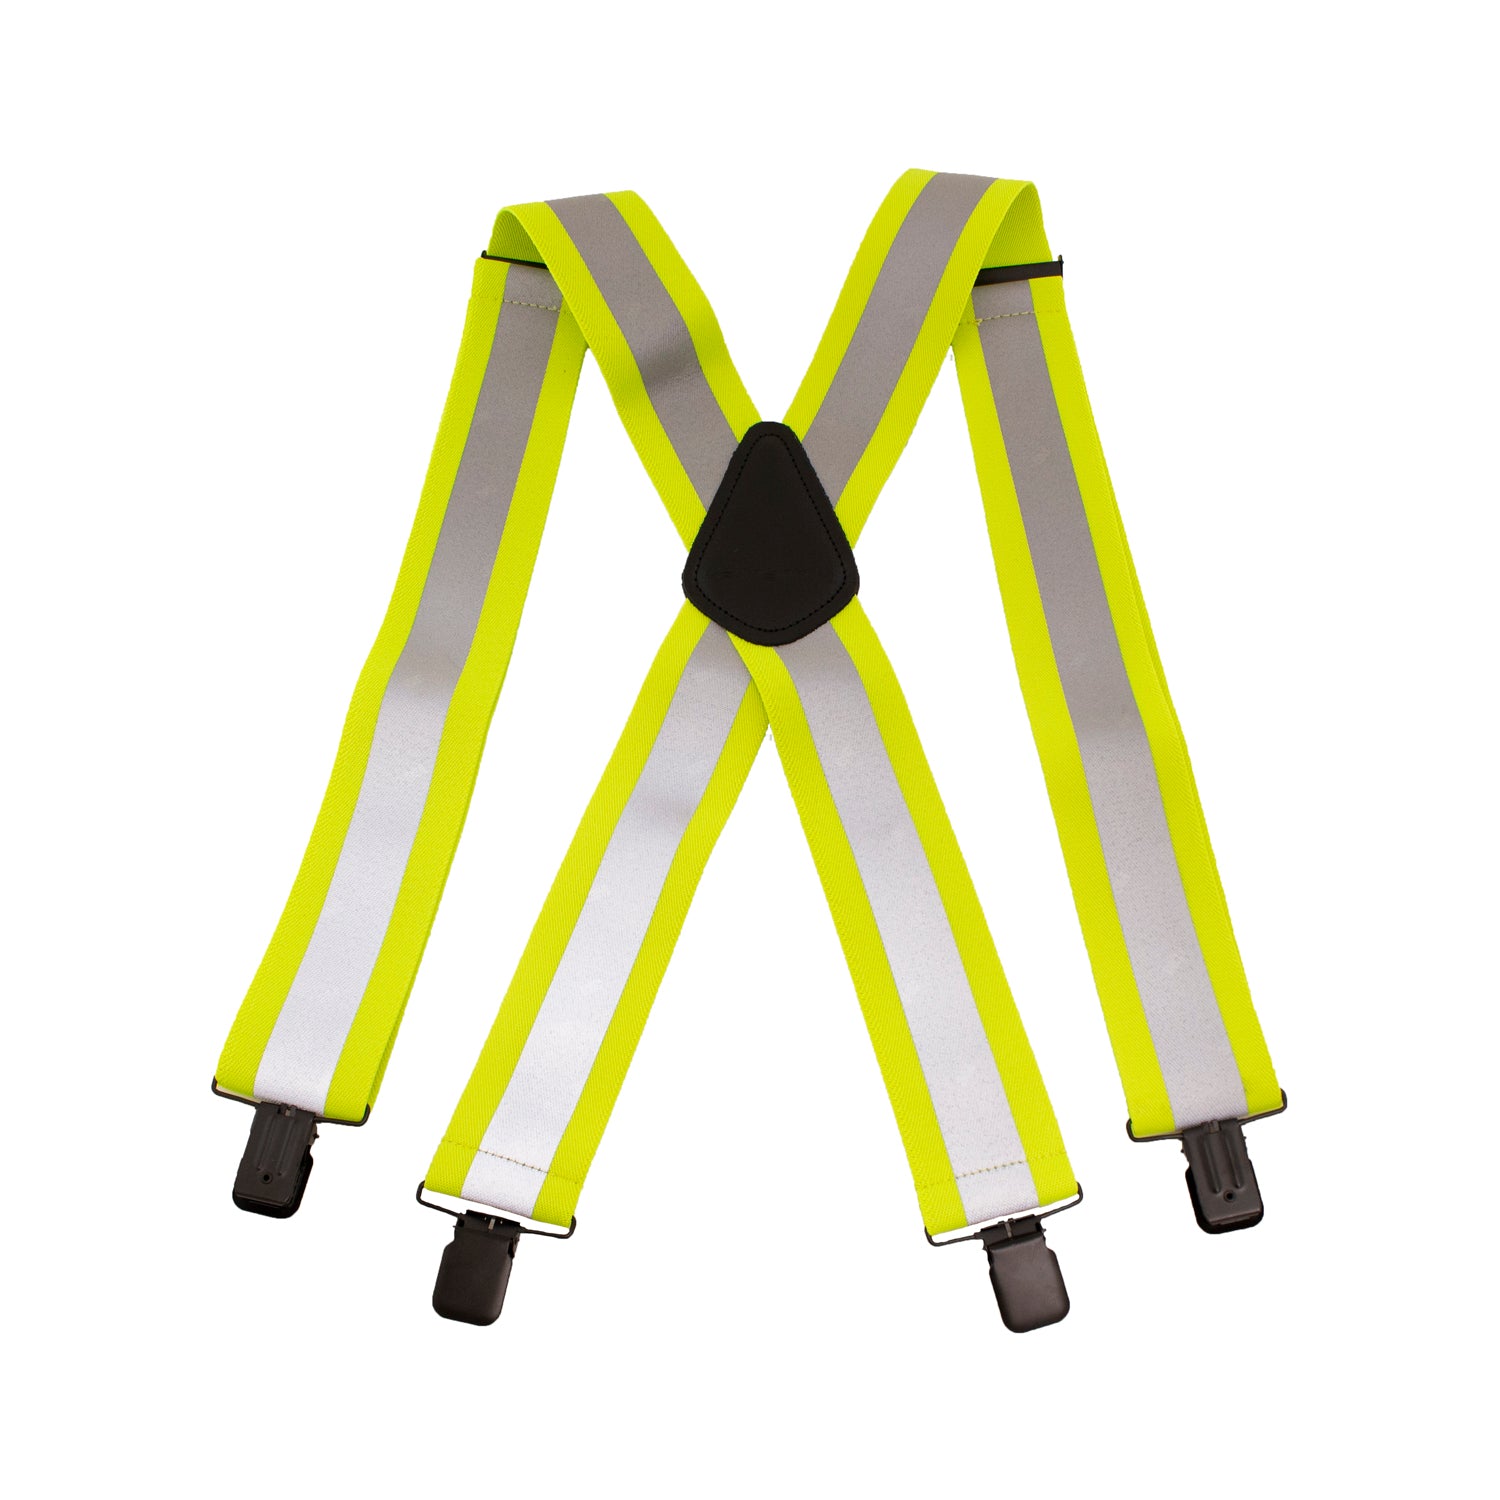 Carhartt Men's High Visibility Reflective Suspenders A0005524